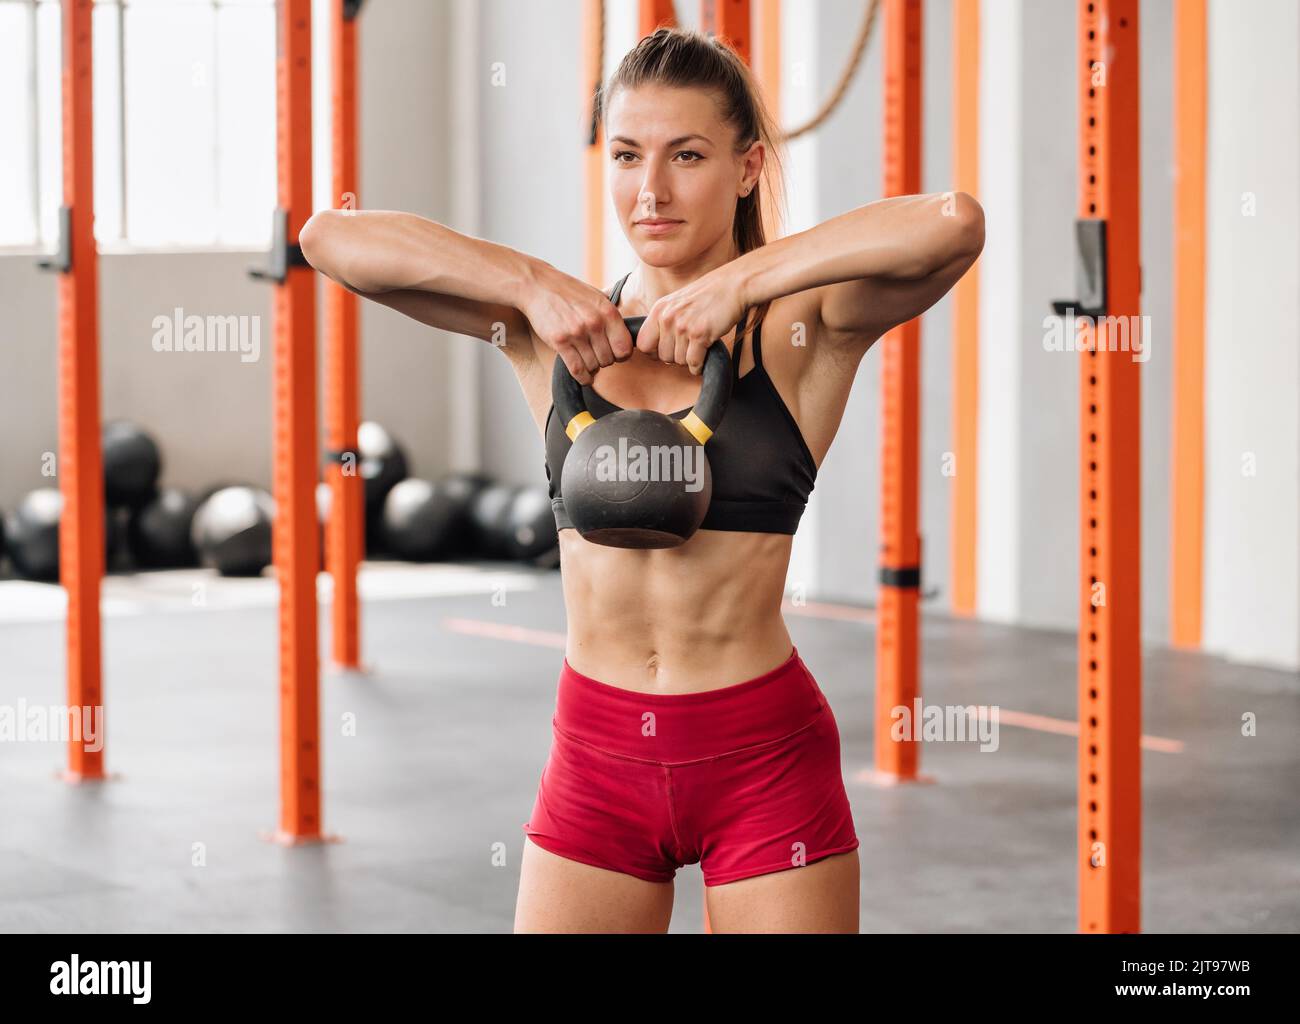 Strong female athlete in bra and shorts doing kettlebell high pull exercise and looking away during functional workout on blurred background of light Stock Photo